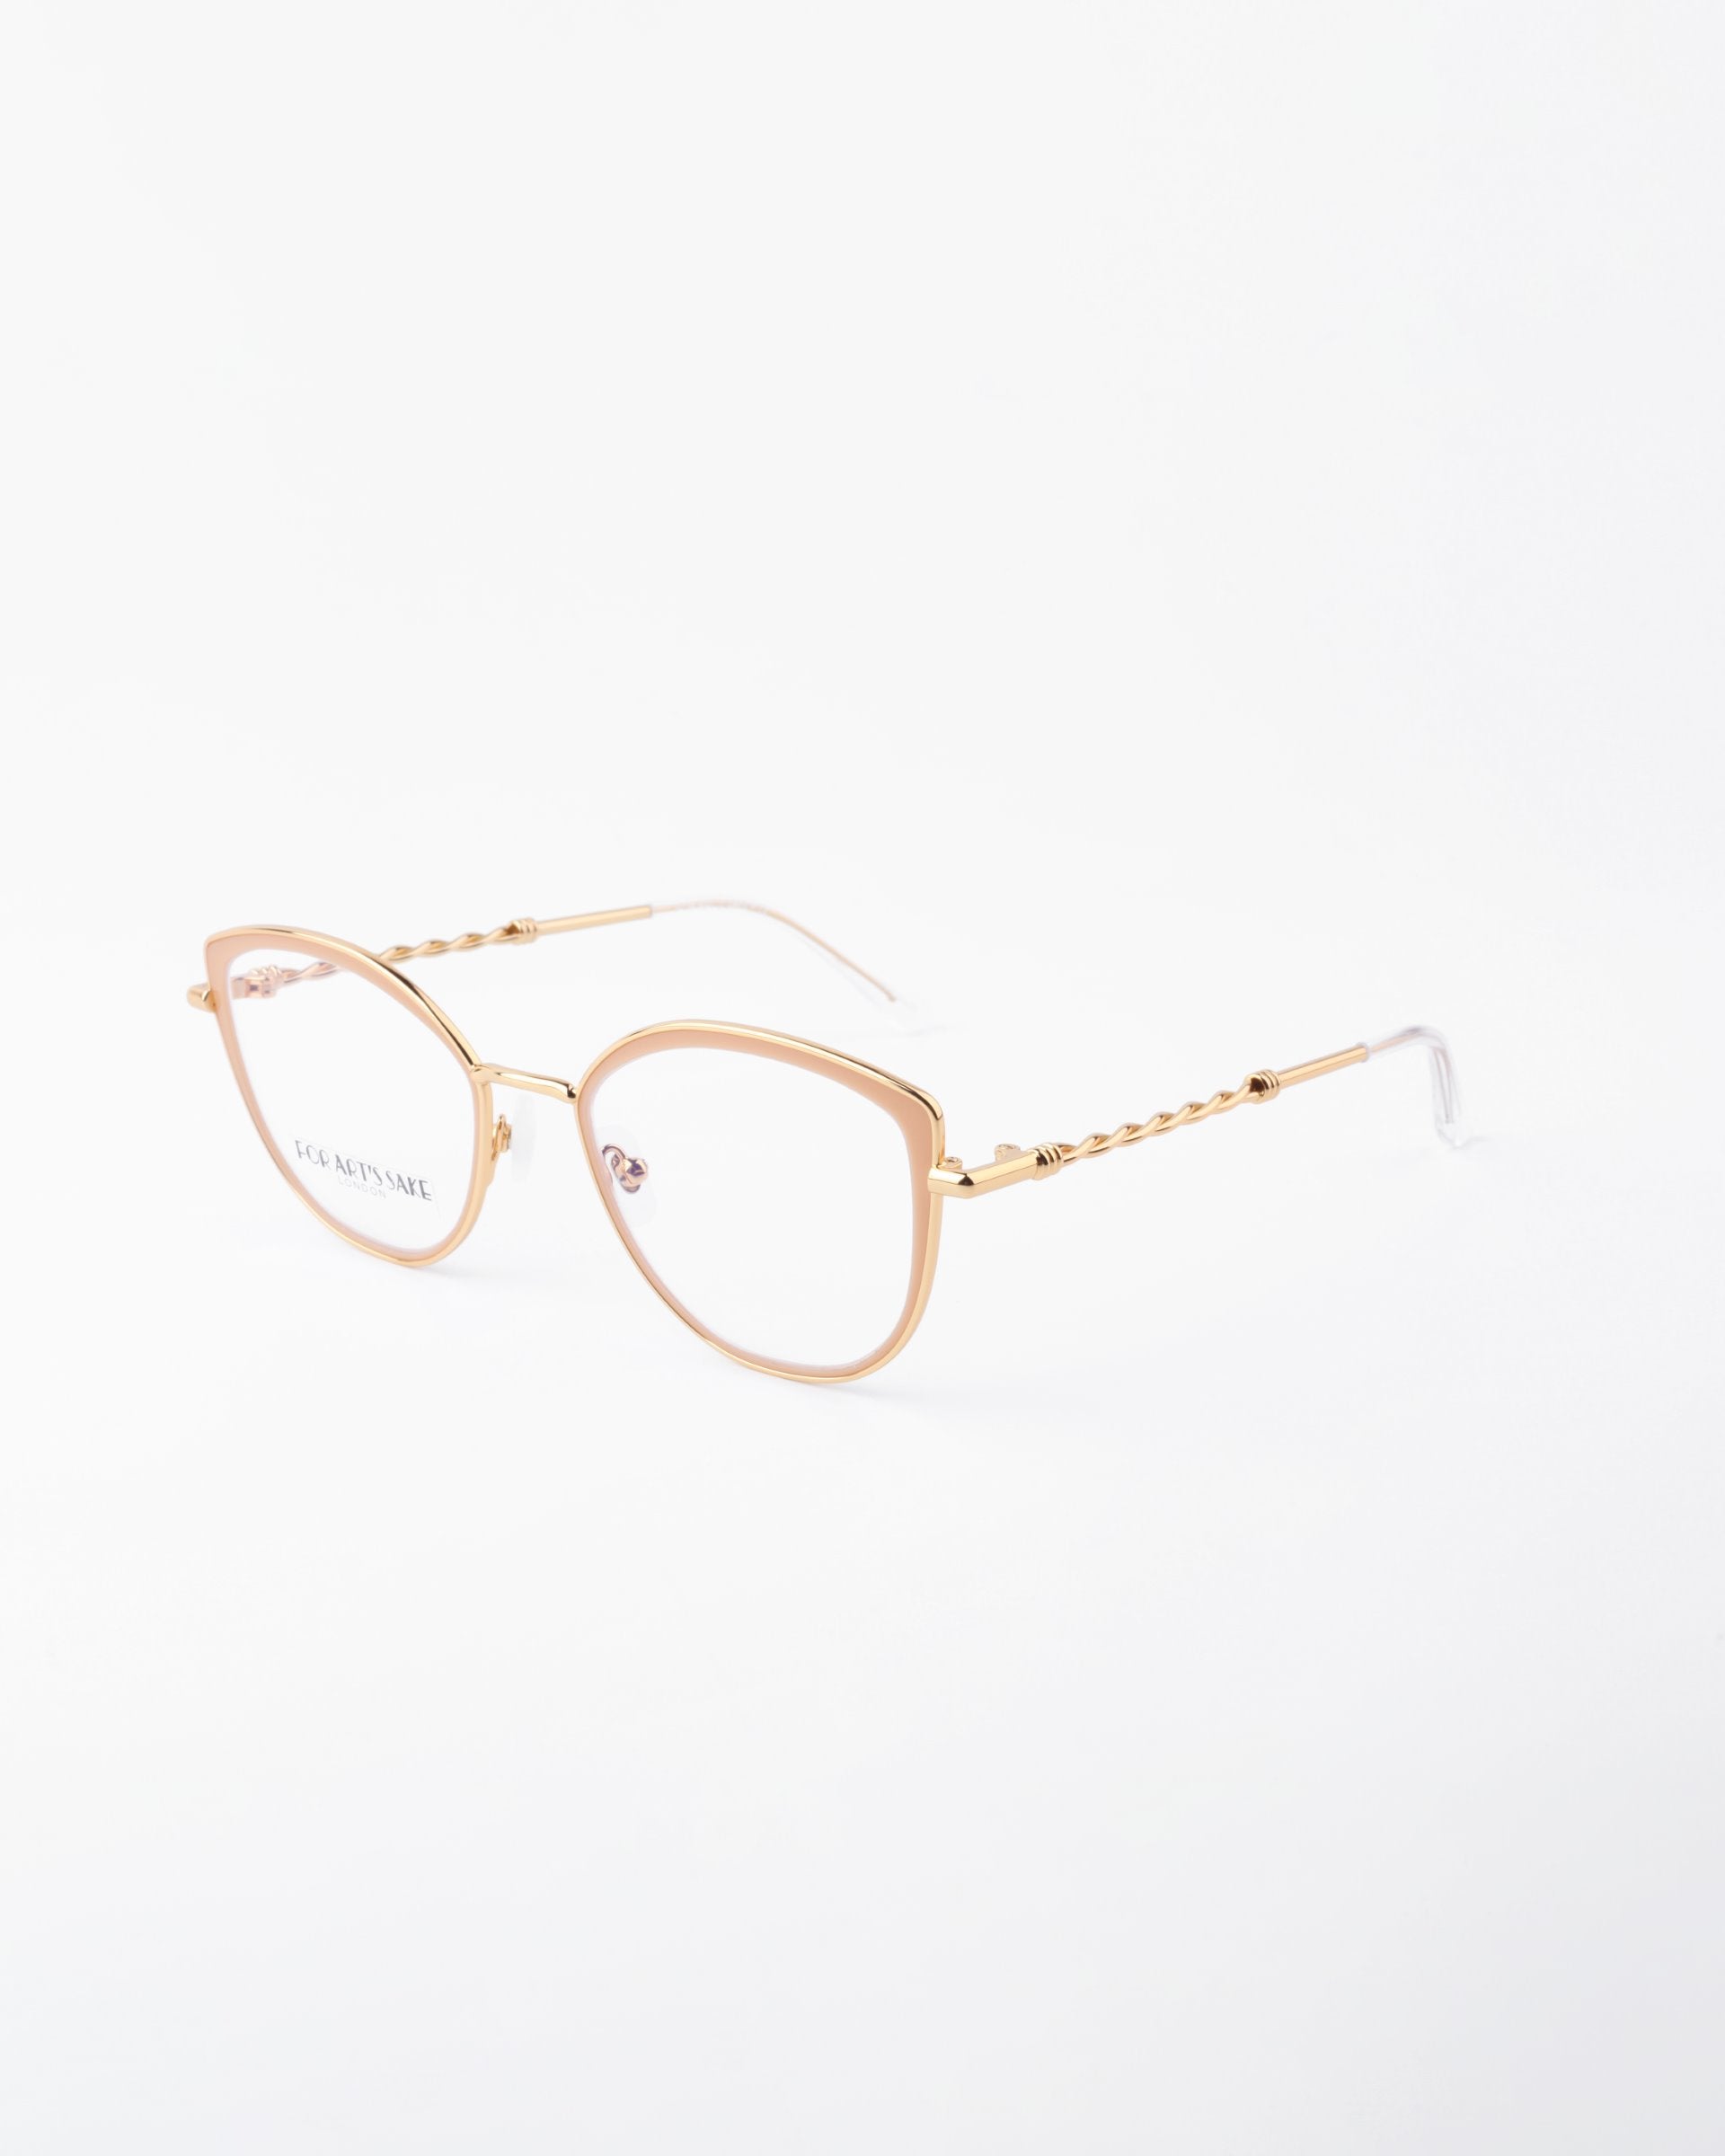 Gold-framed eyeglasses with a subtle cat-eye shape, featuring clear blue light filter lenses and intricate detailing on the arms. The brand name &quot;For Art&#39;s Sake®&quot; is visible on the left lens. The frame rests against a plain white background.